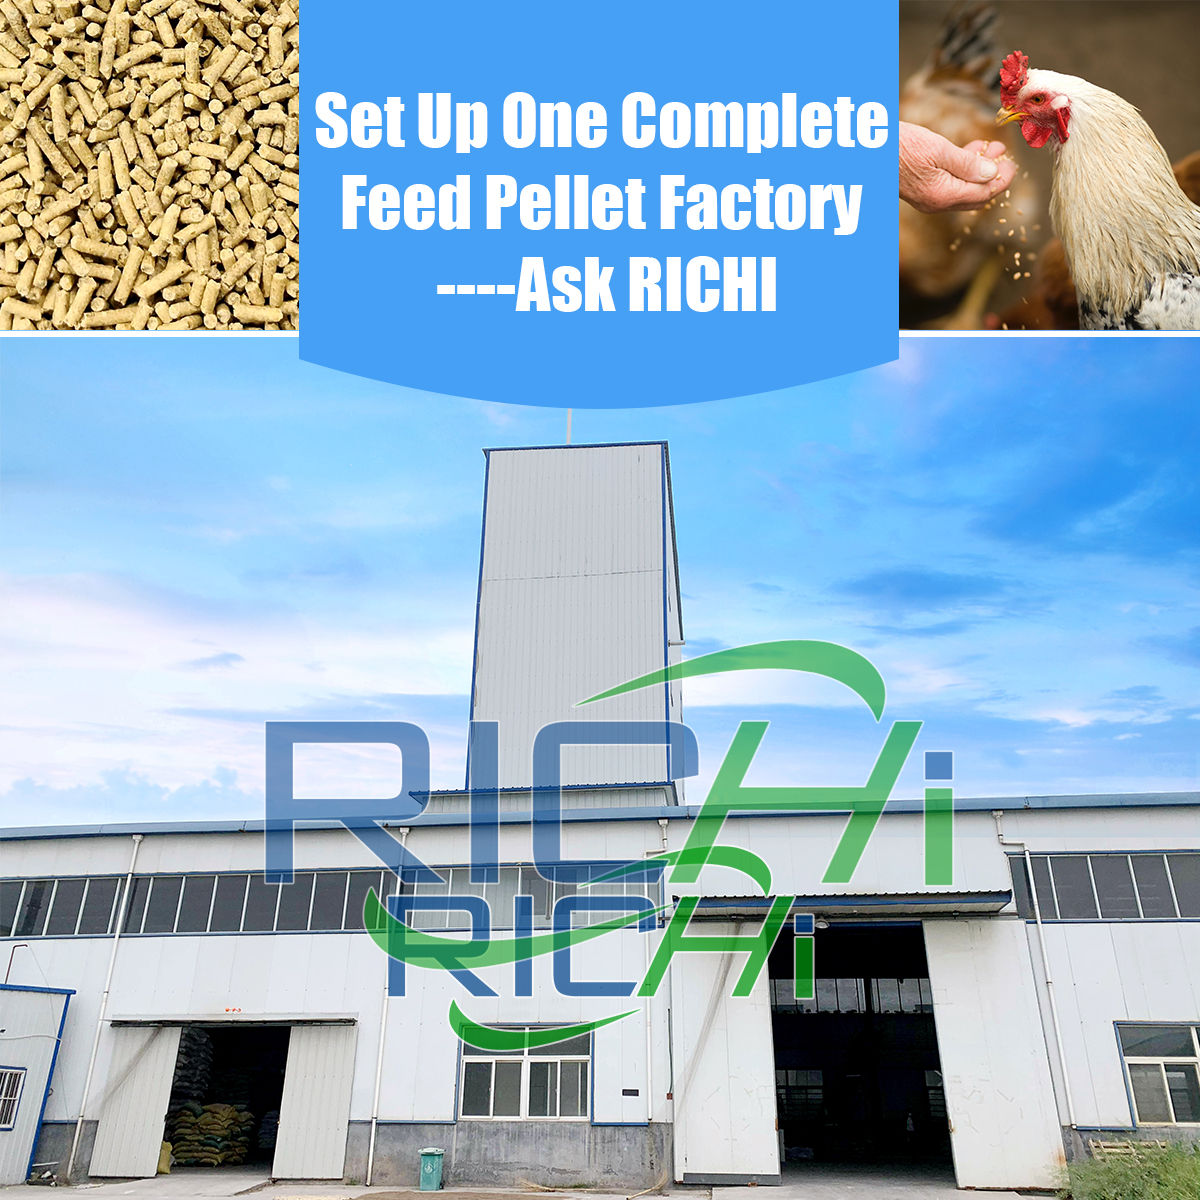 tal pasrly poultry feed mill feed mills for poultry and cattle poultry feed production machines